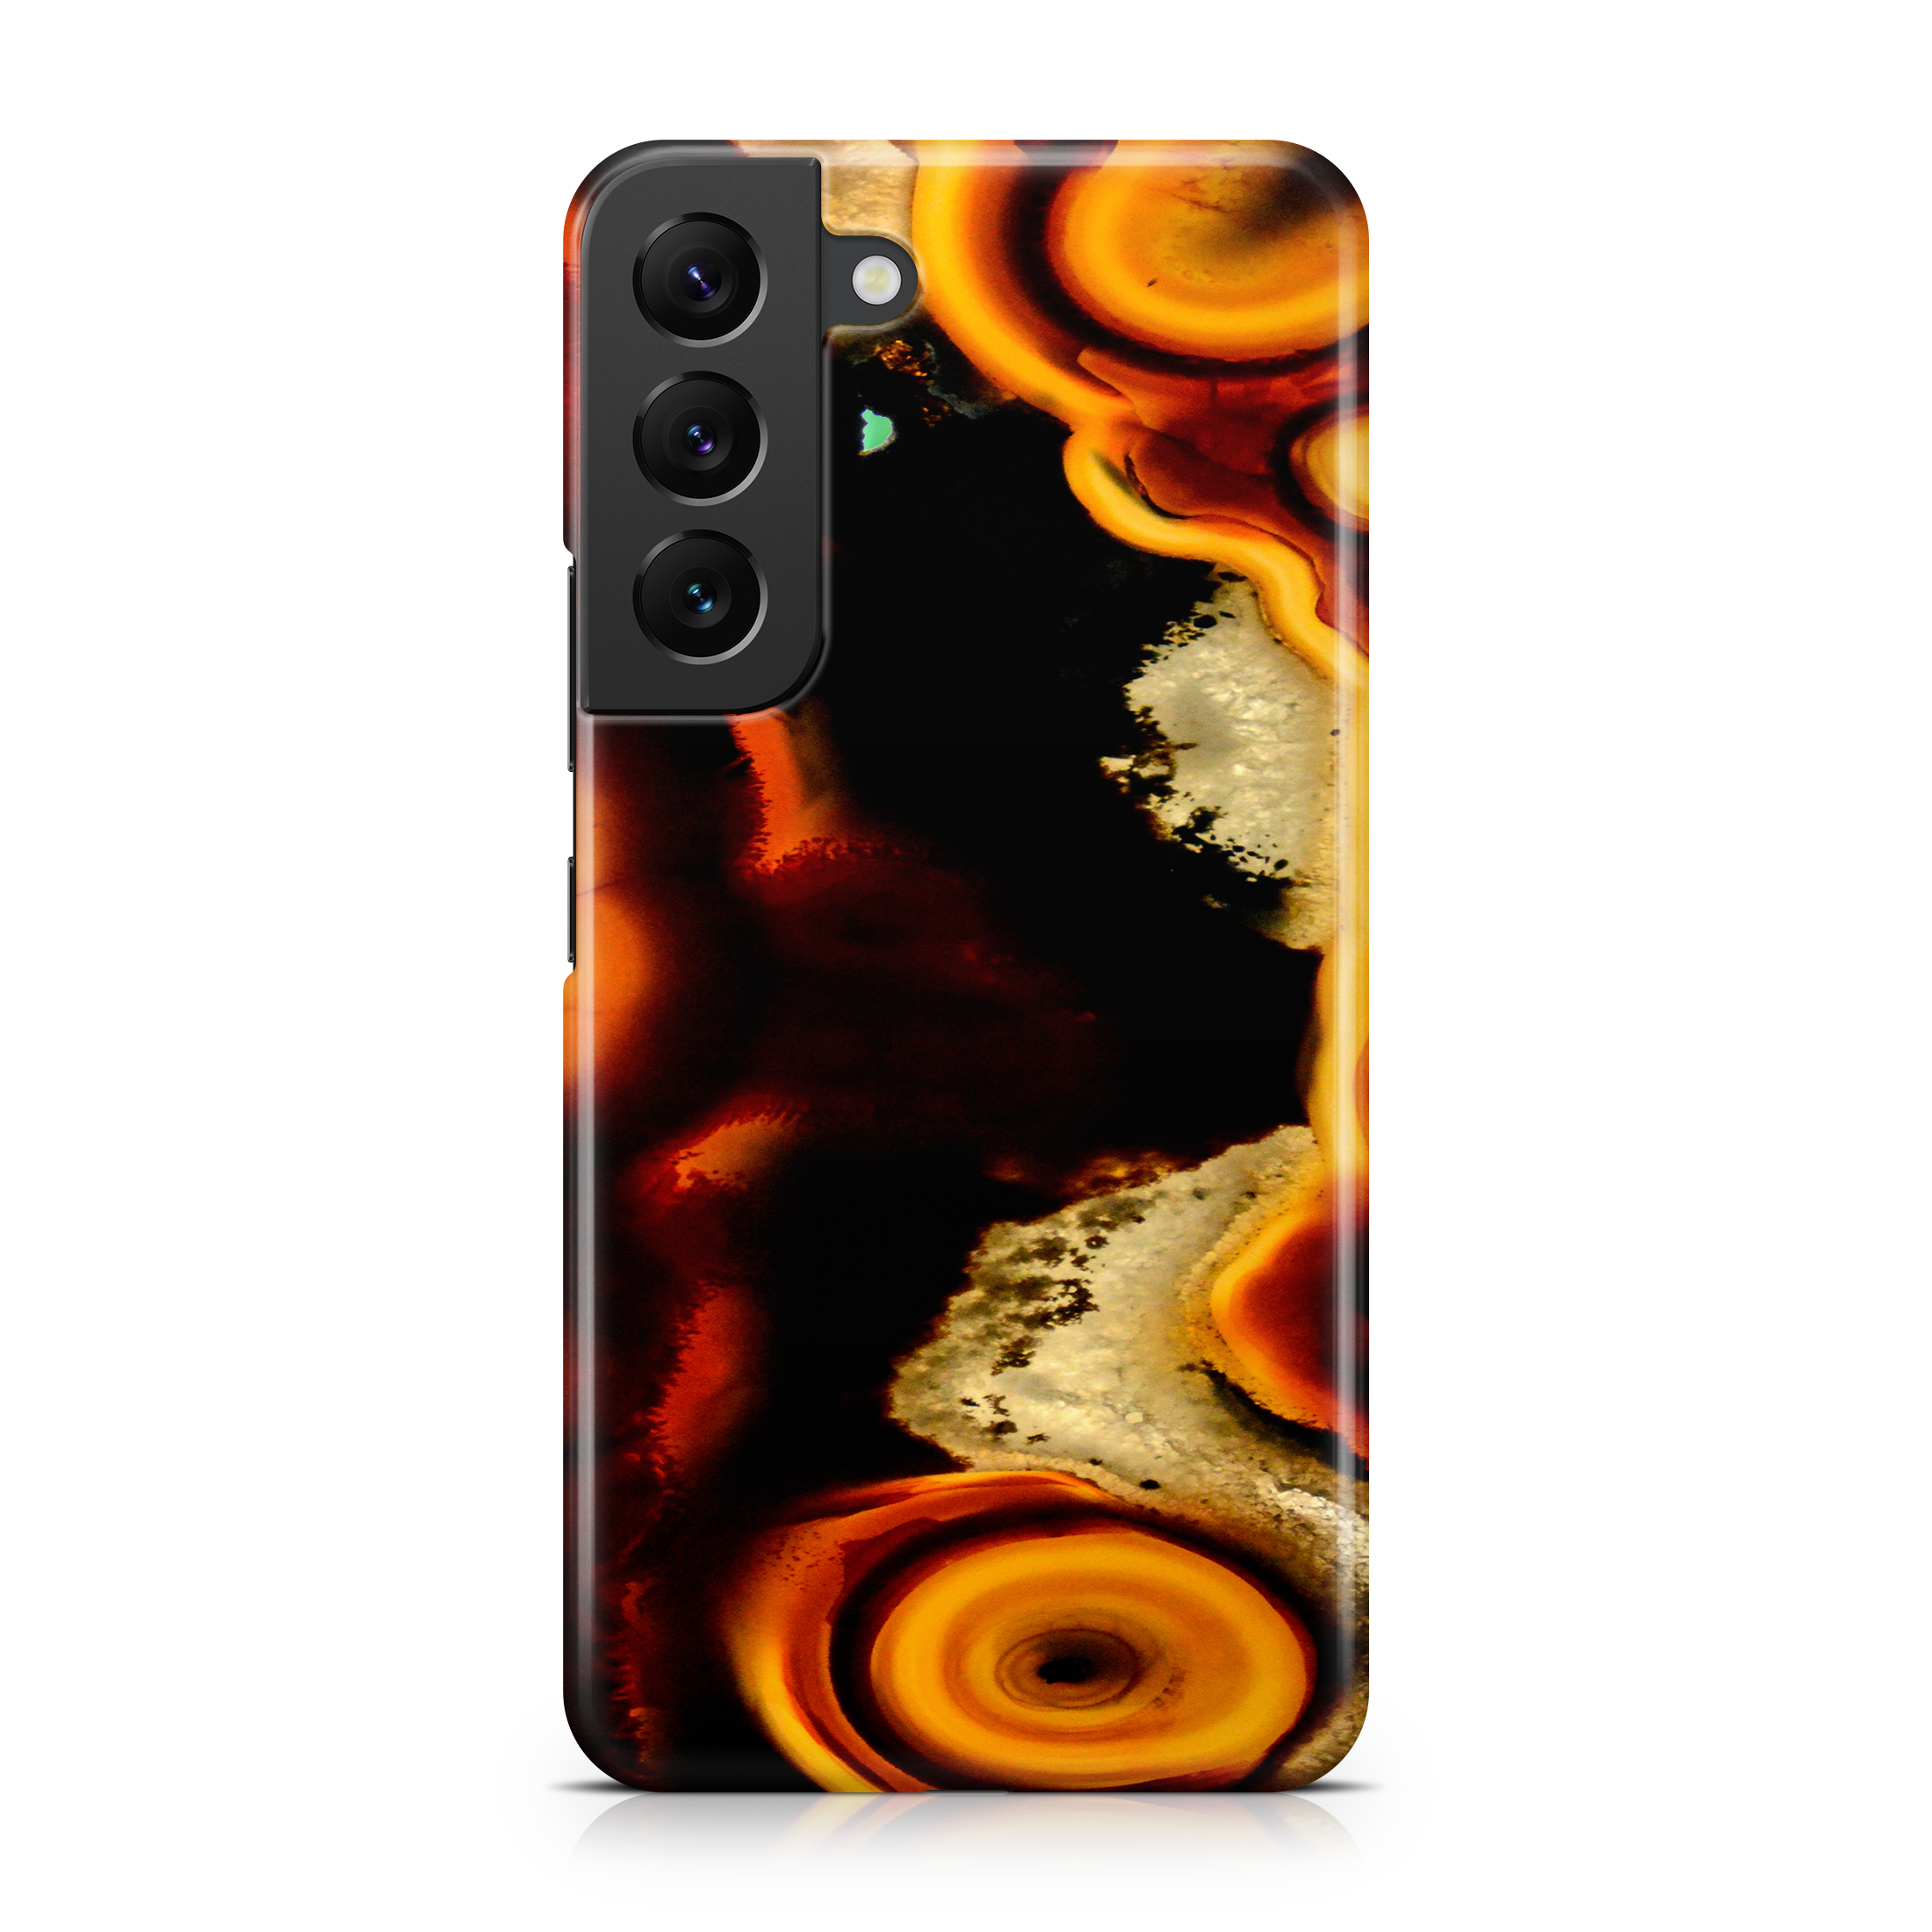 Orange Agate - Samsung phone case designs by CaseSwagger